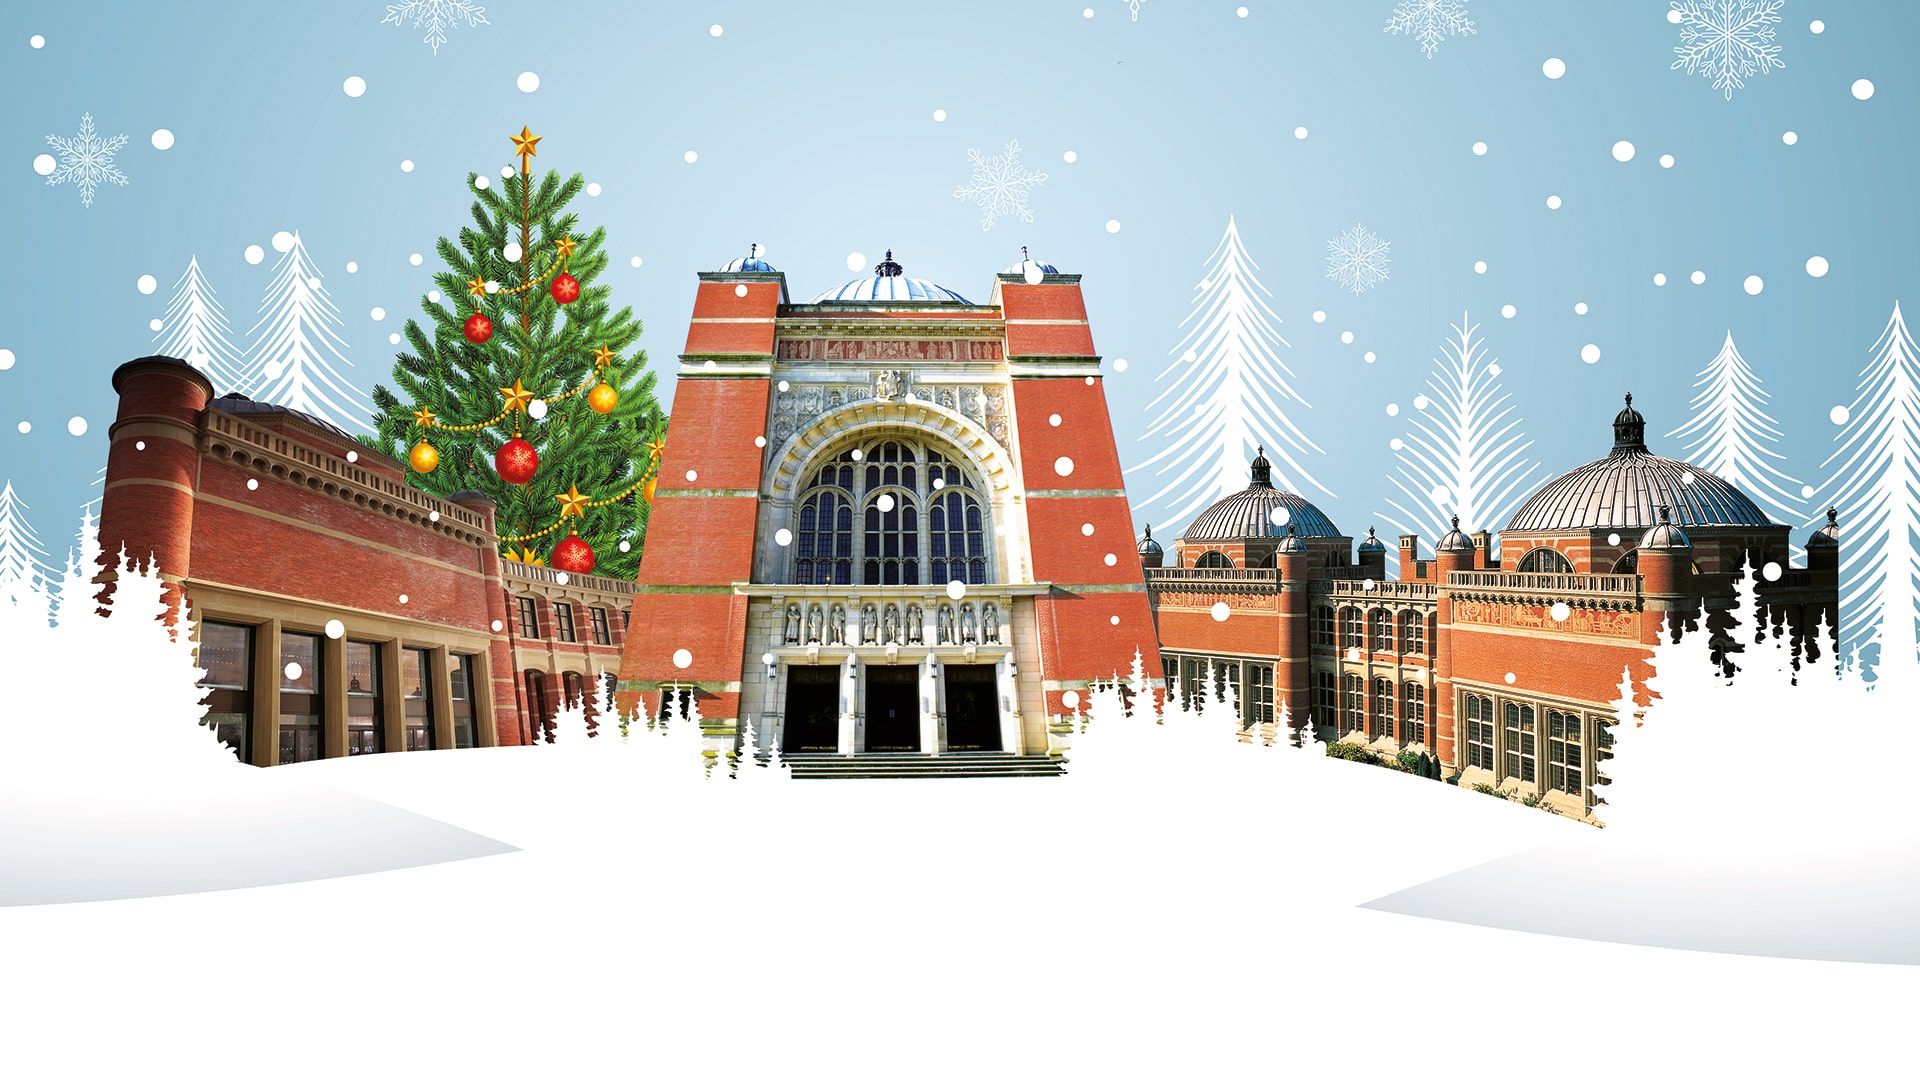 Design showing a snowy Aston Webb scene, with a giant Christmas tree standing in the background.